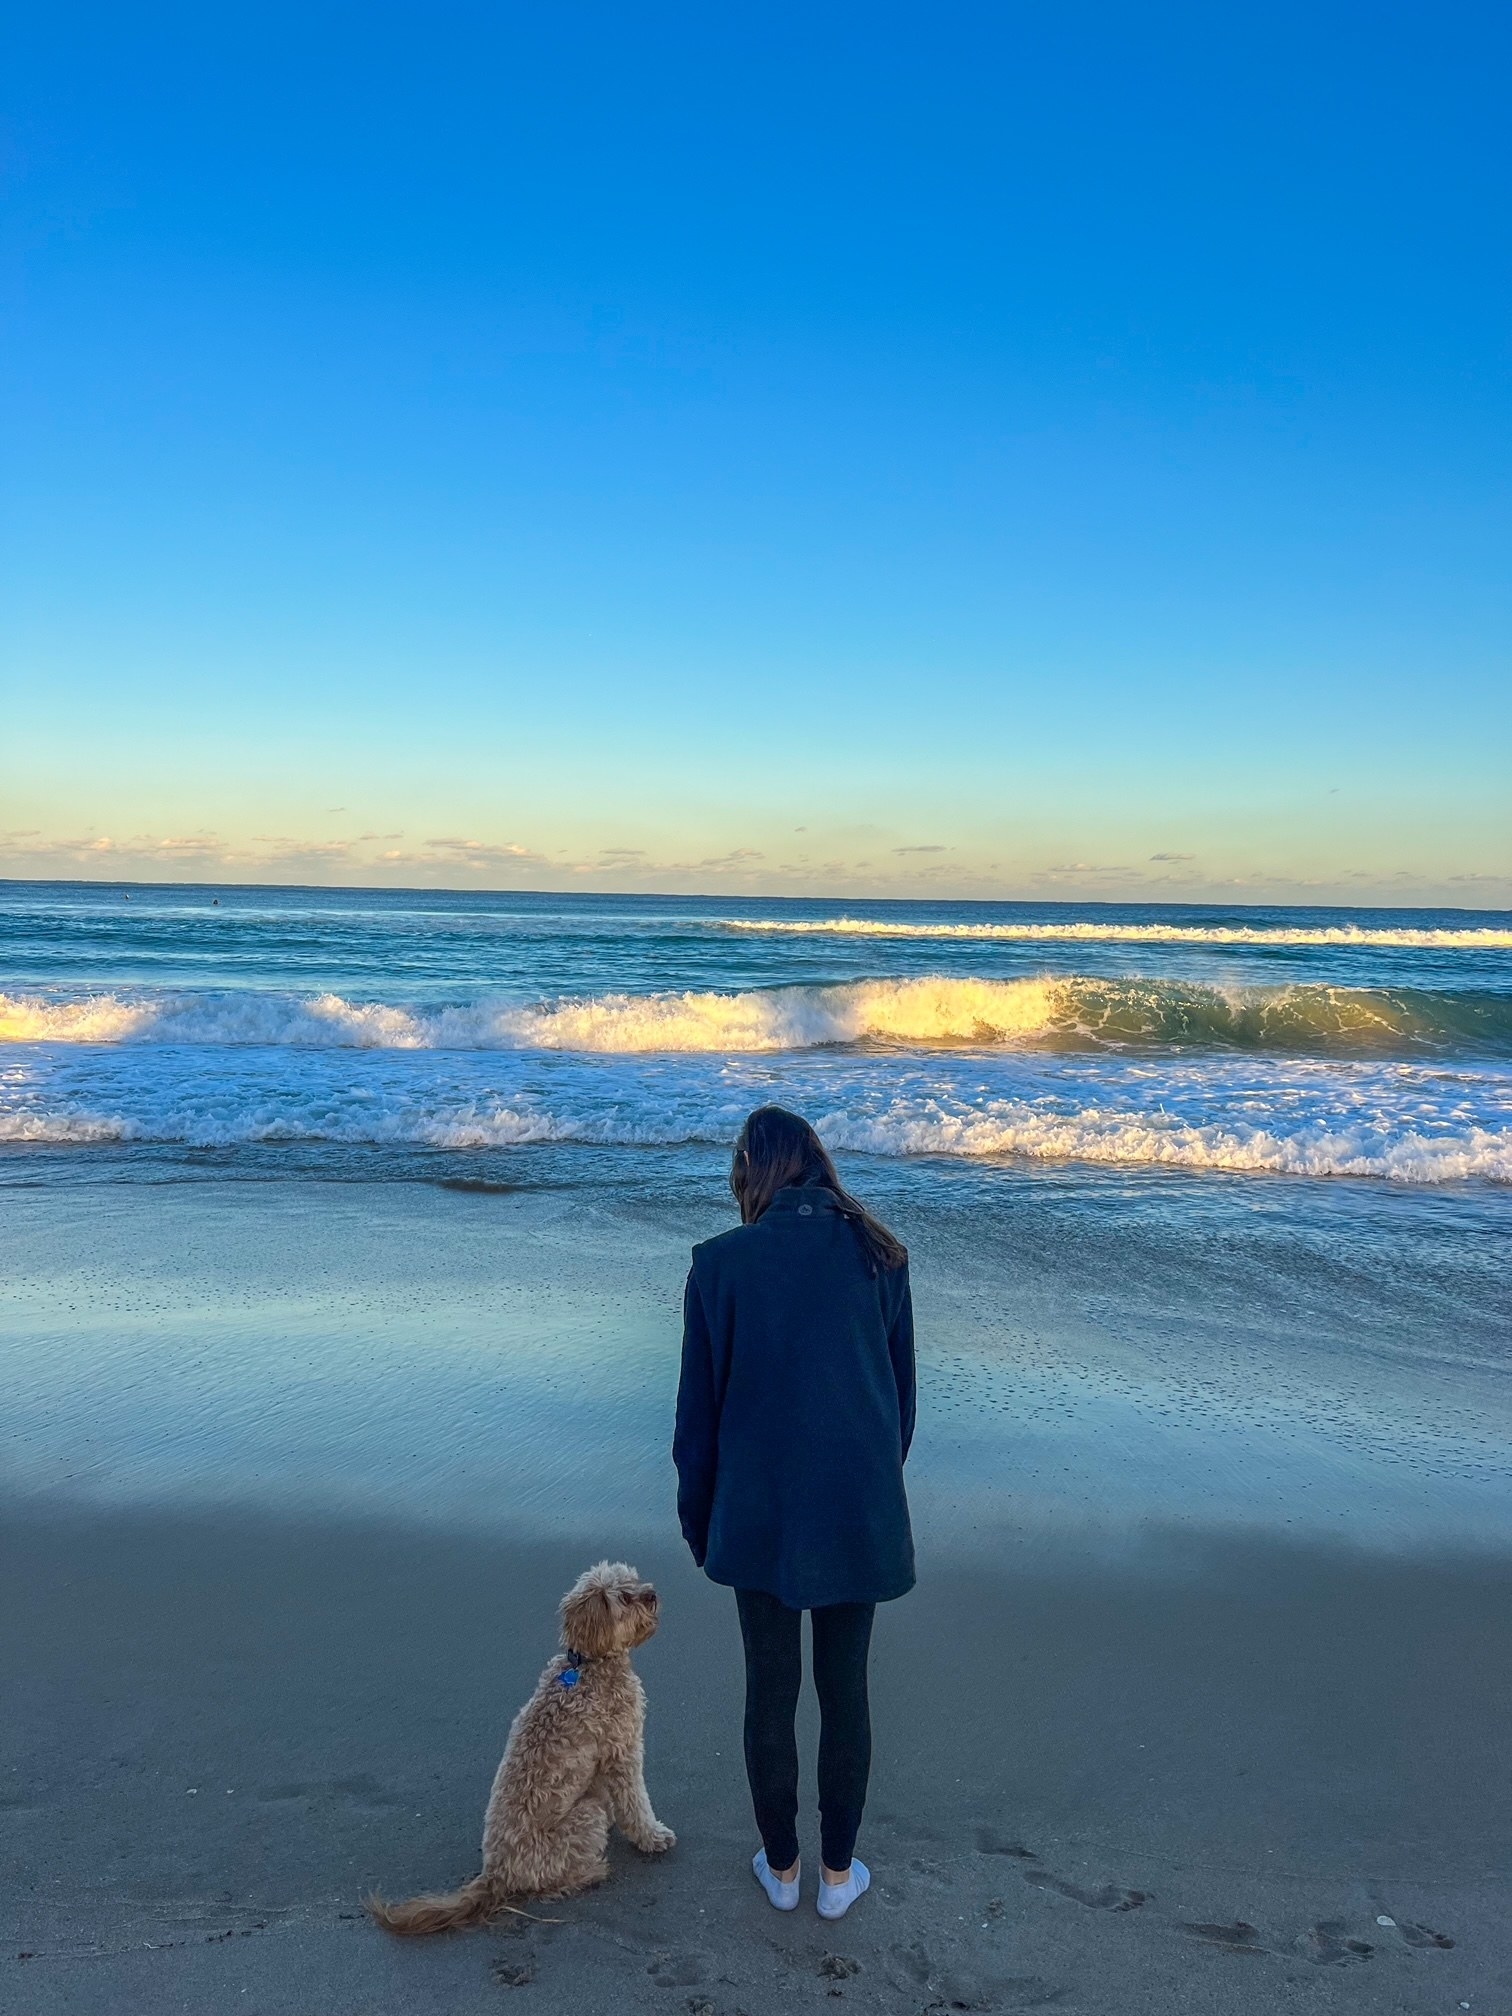 Me standing by the ocean with my dog.